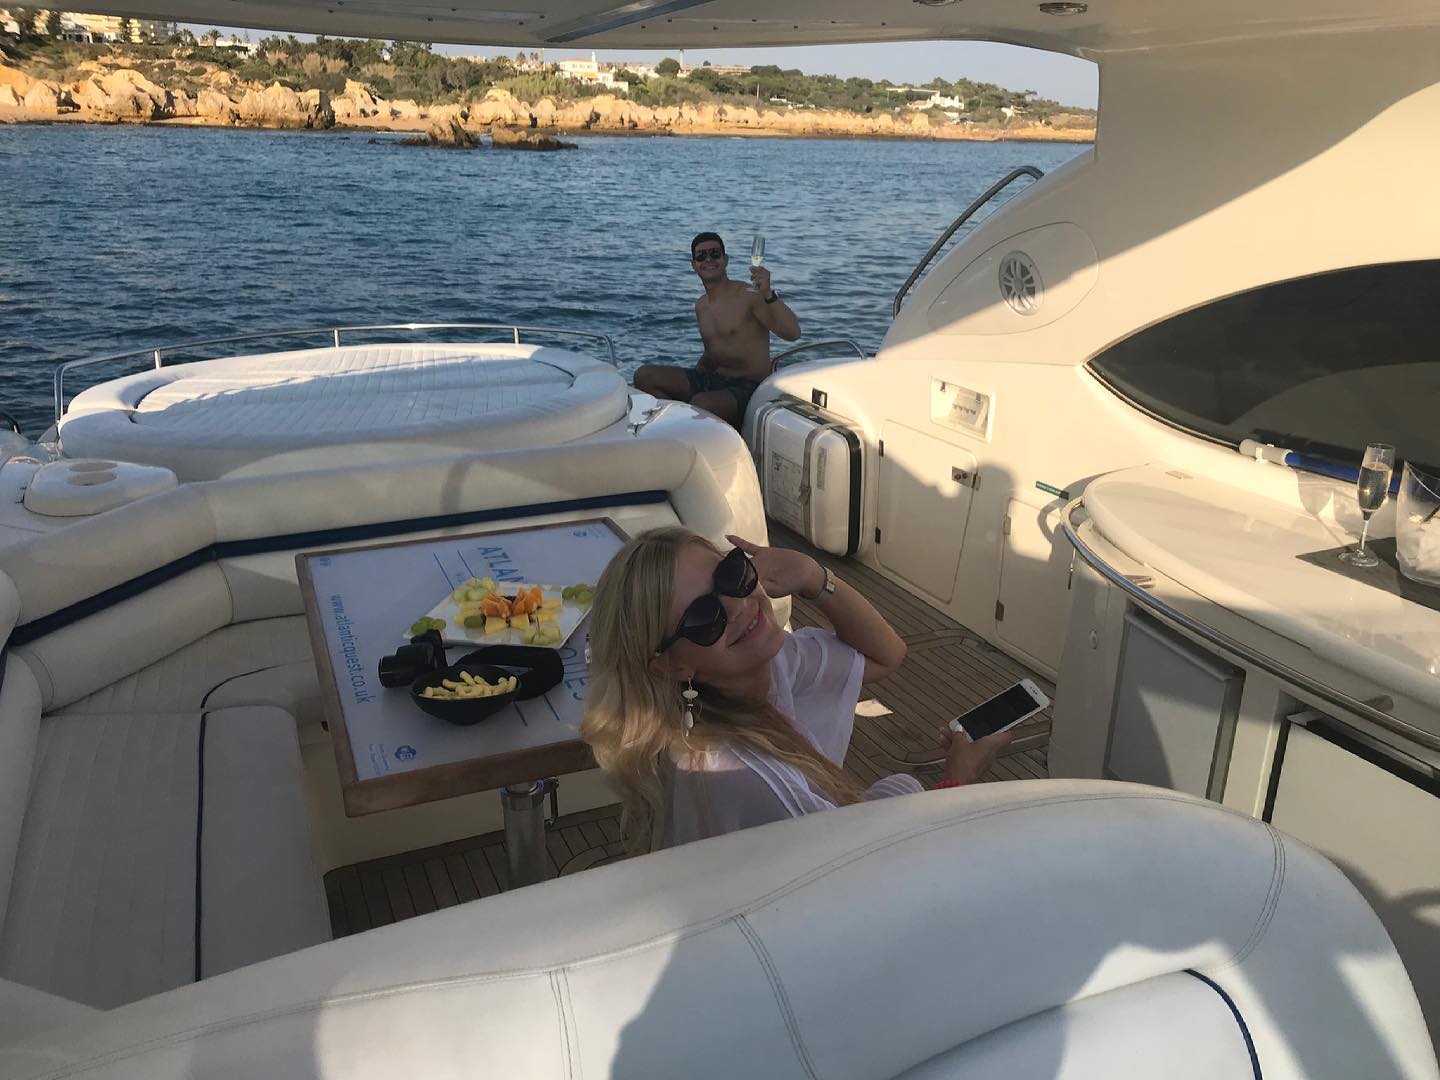 Private cruise from Vilamoura to Benagil cave
